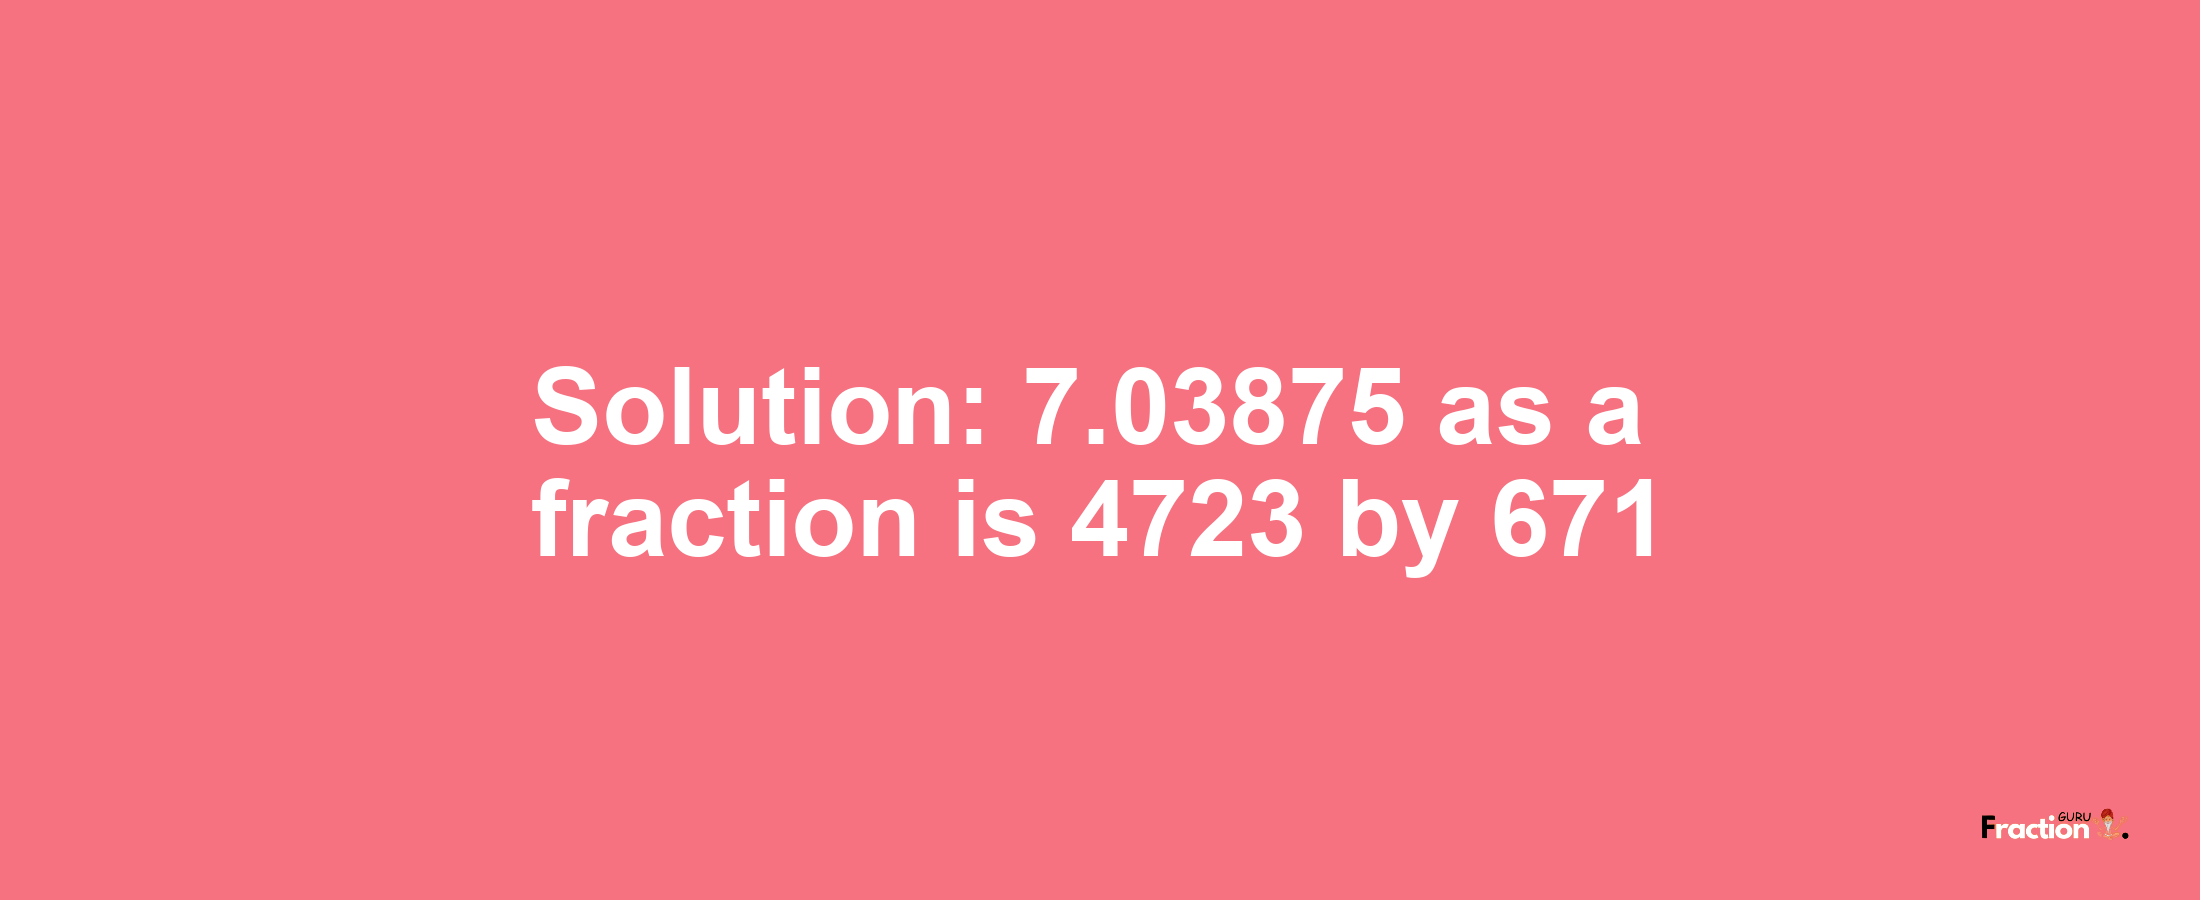 Solution:7.03875 as a fraction is 4723/671